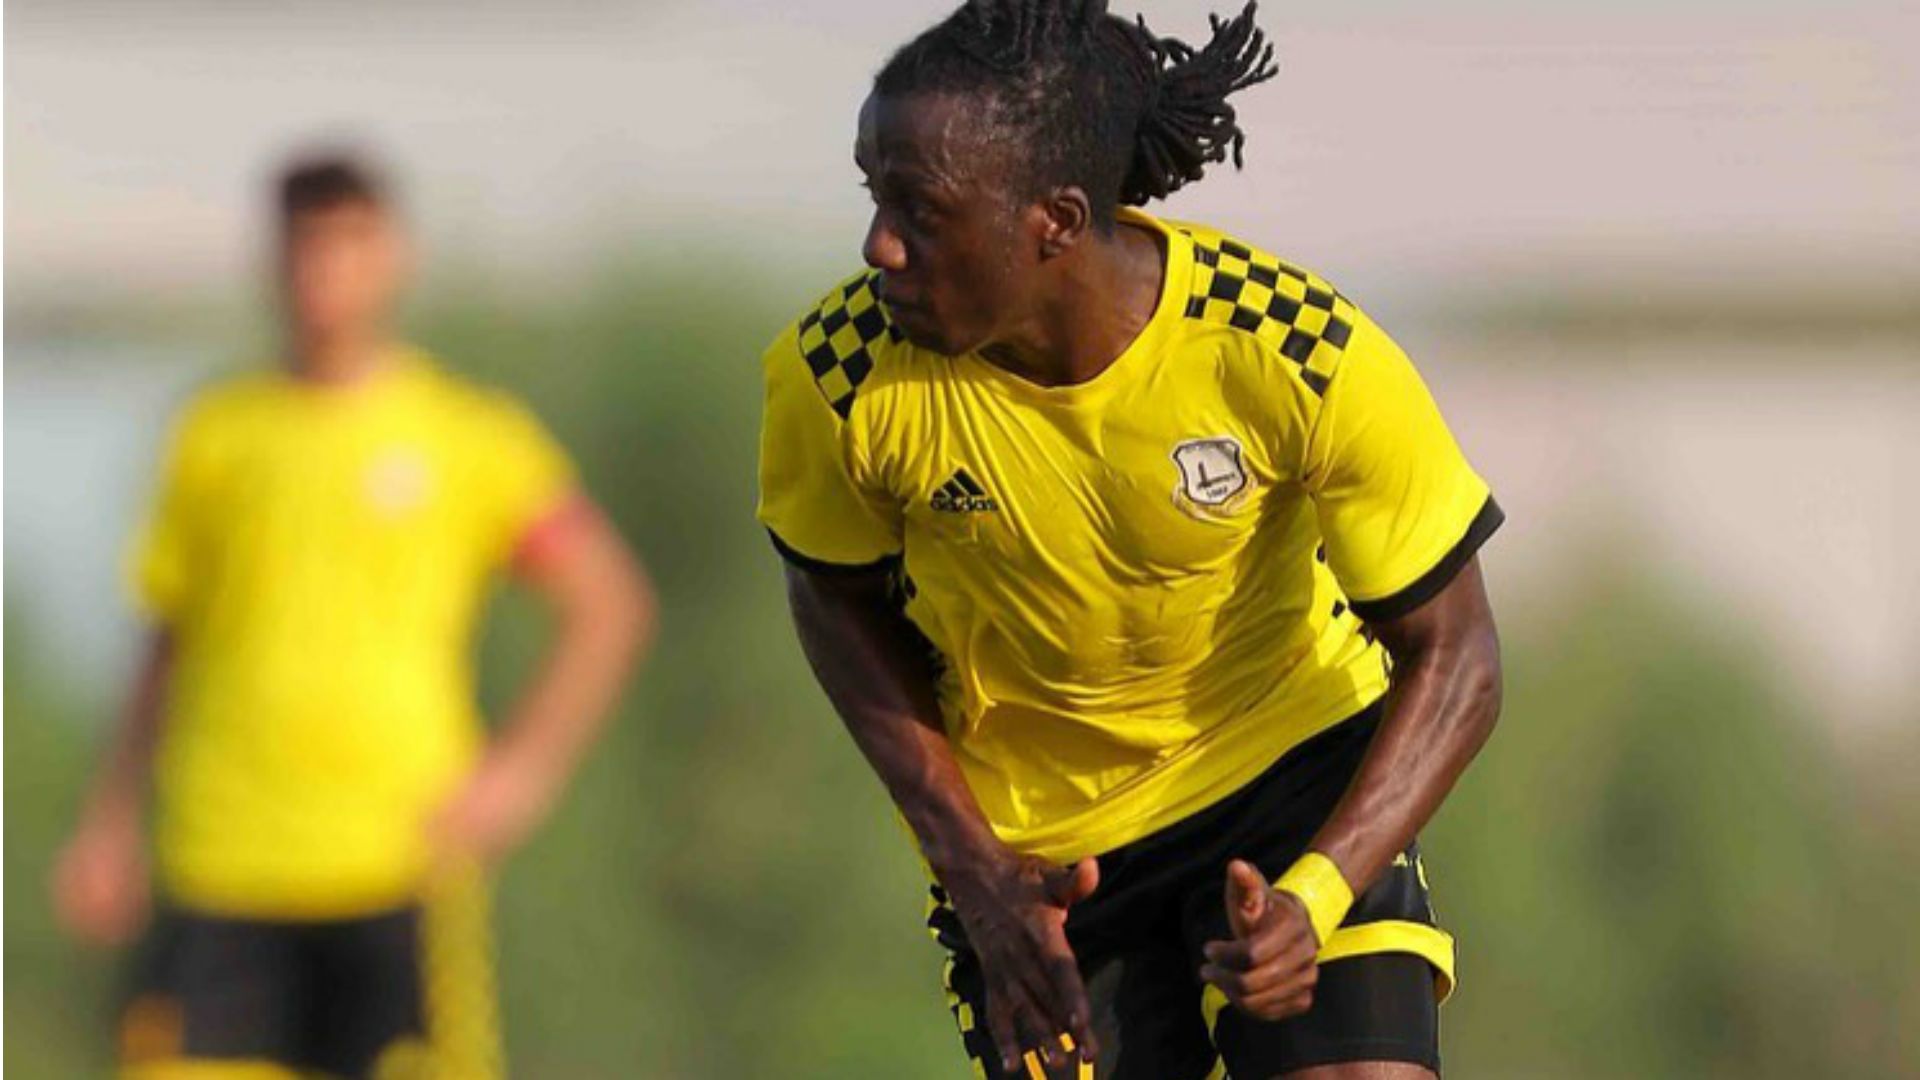 Kateregga confirms end of one-year stay at Erbil SC